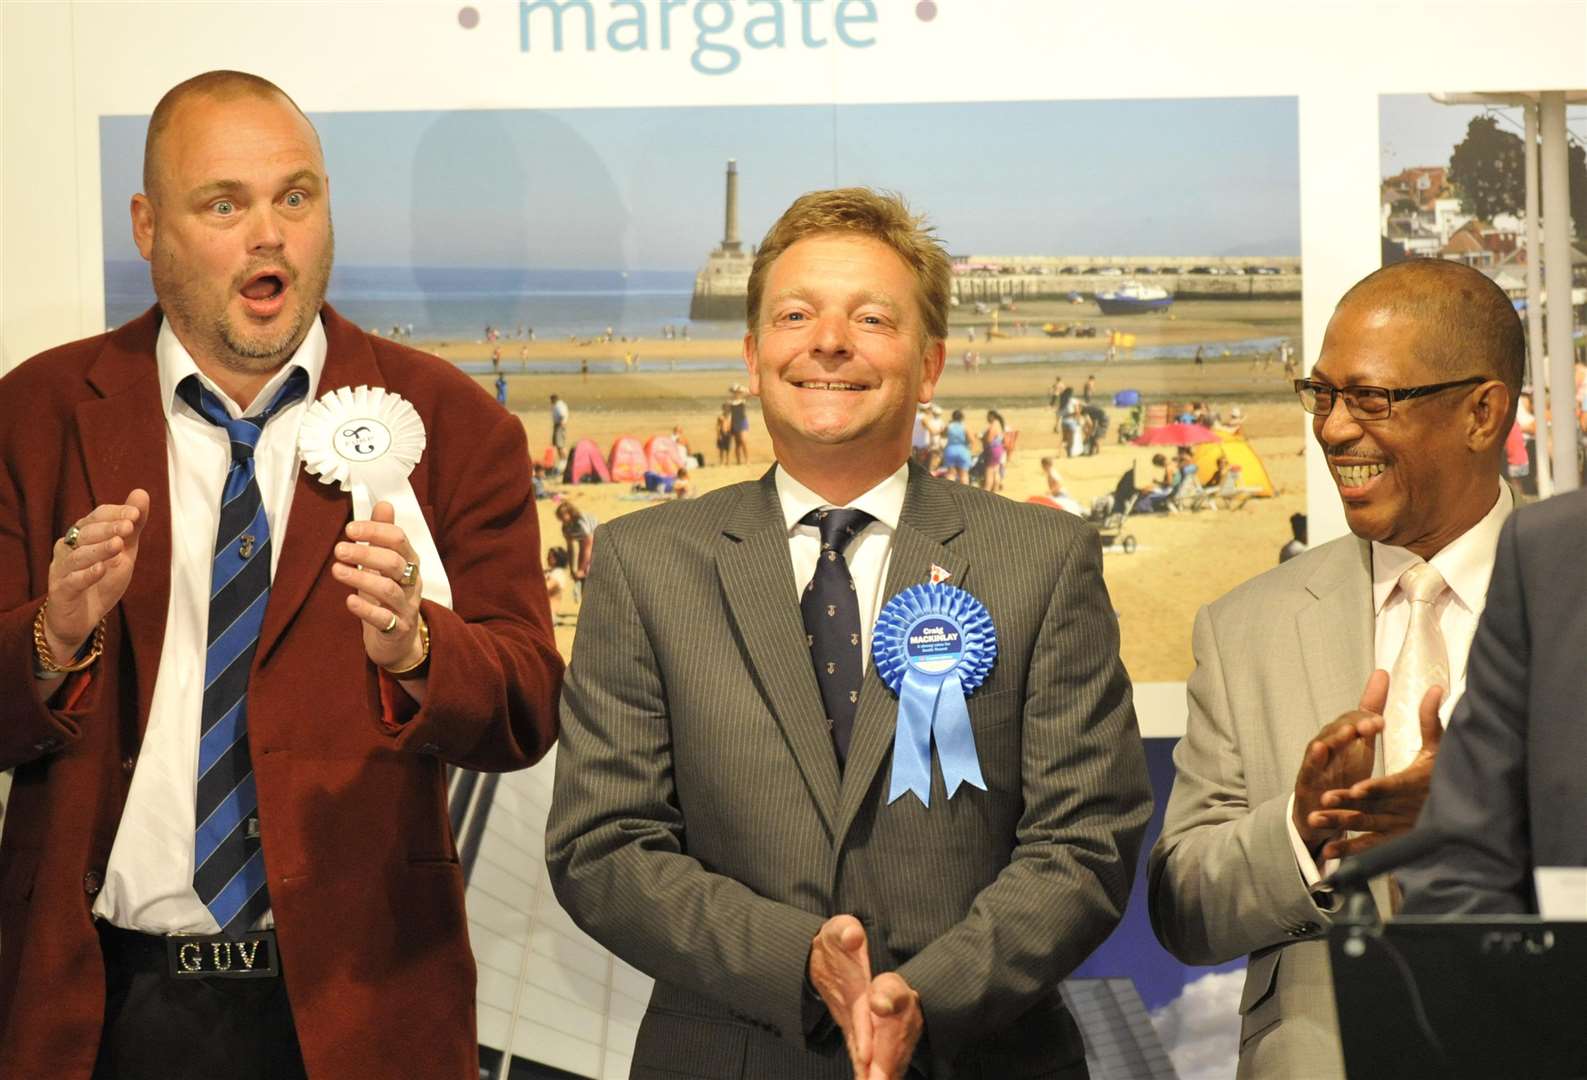 Craig Mackinlay at the election count at The Winter Gardens in Margate